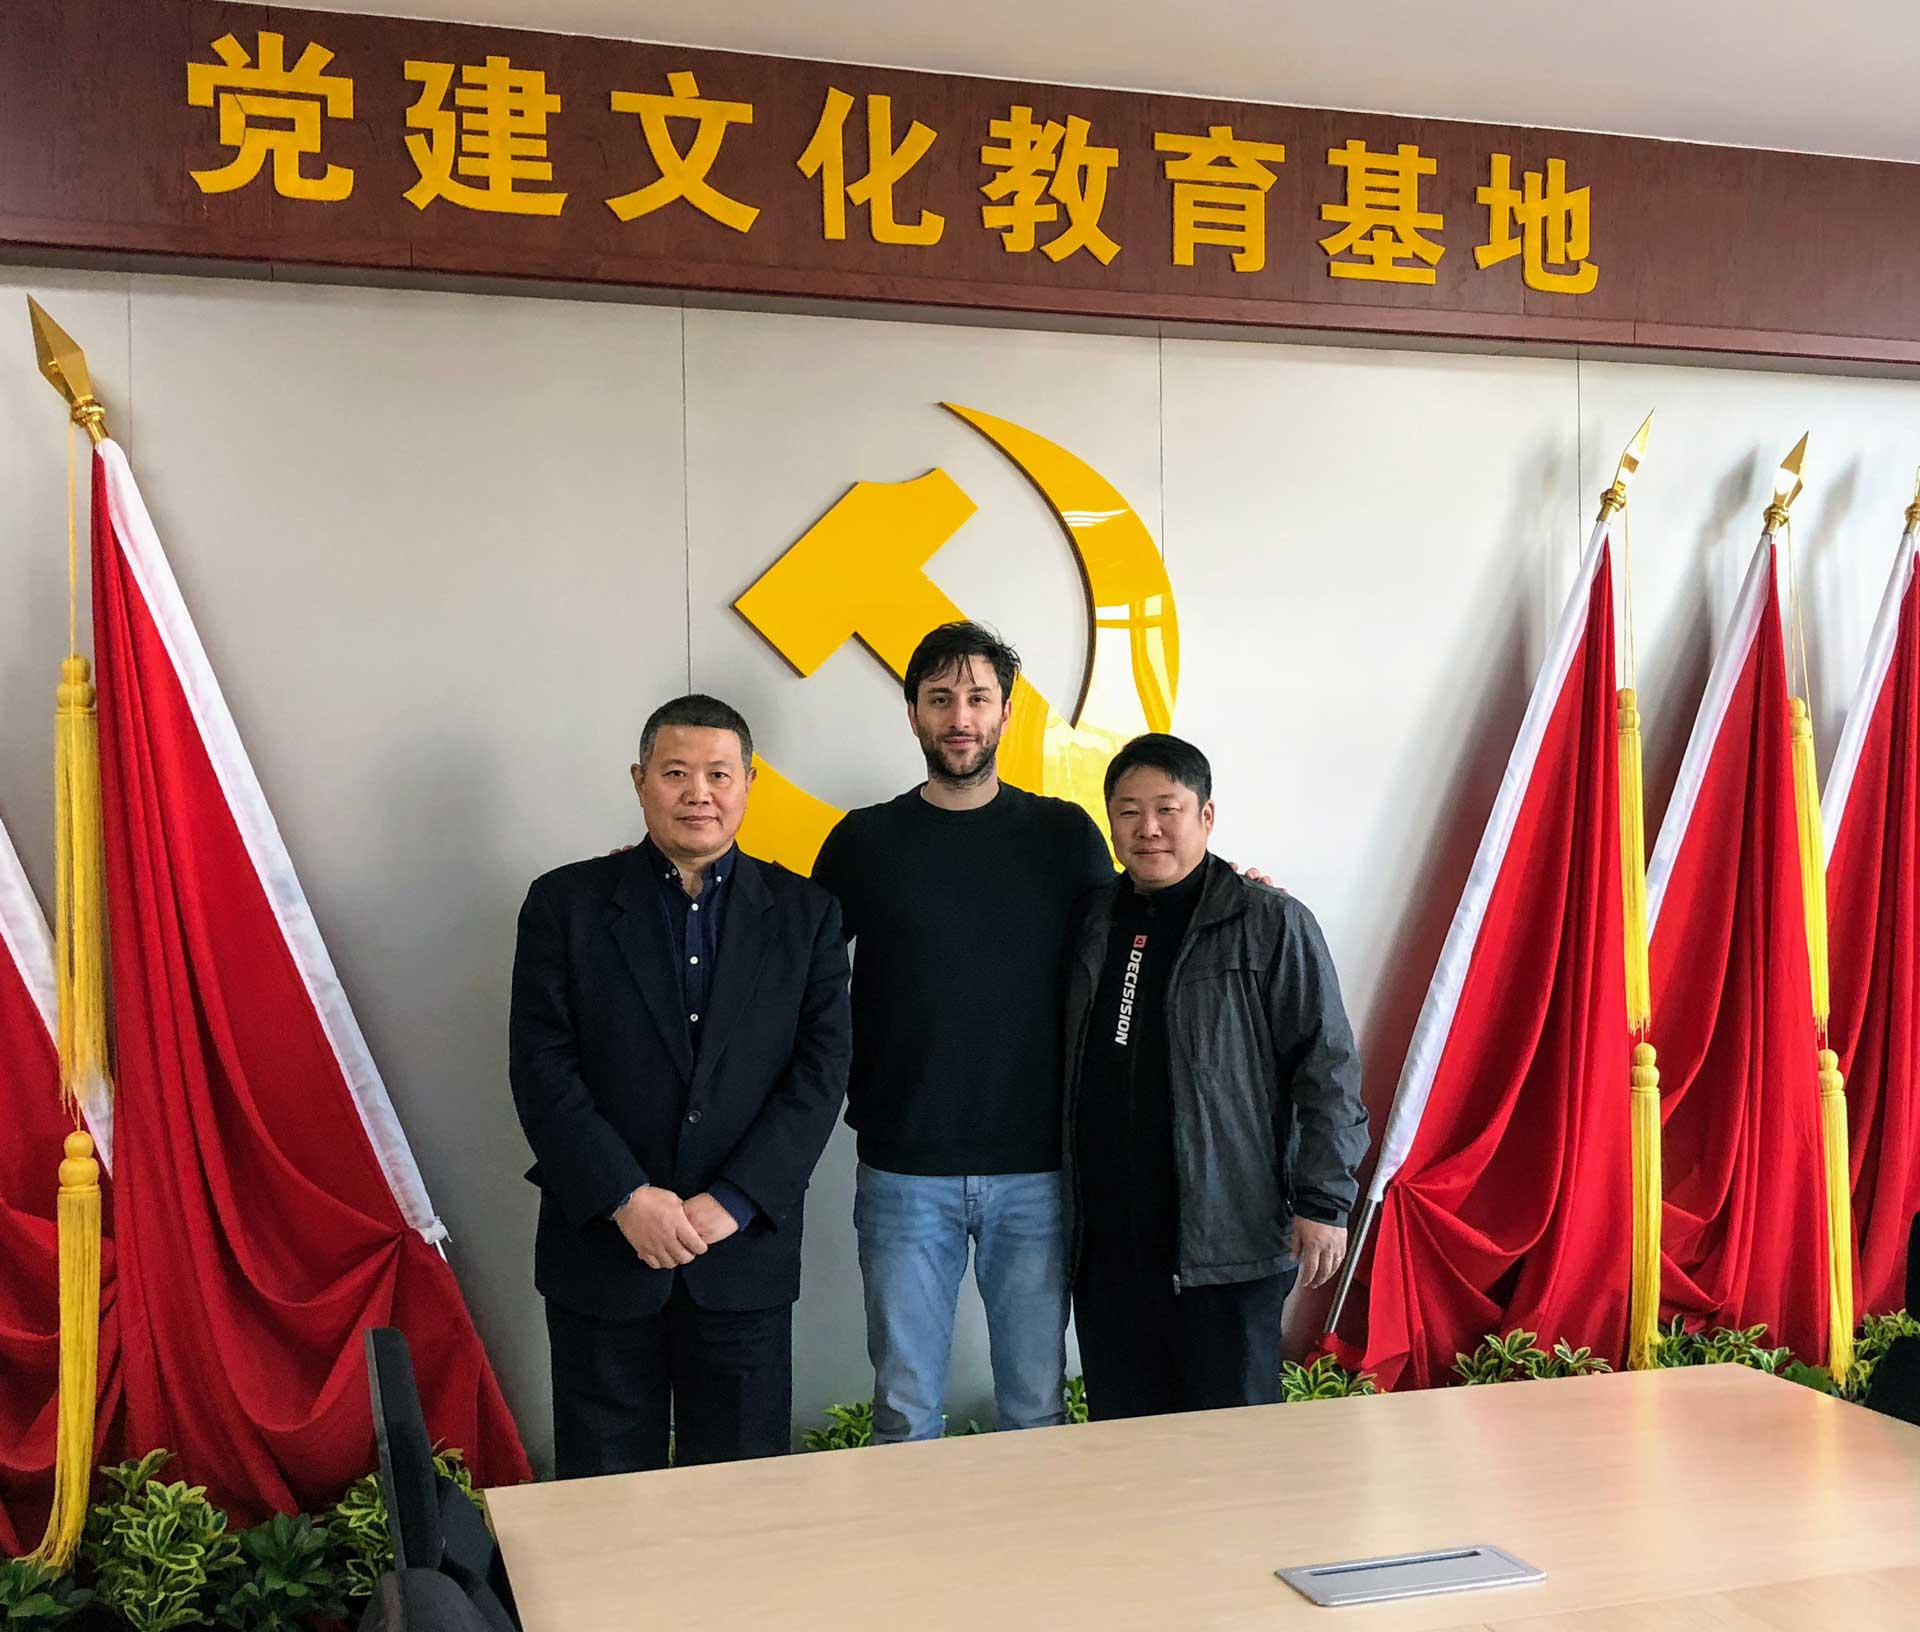 Stefano Cornacchia in China, special guest of Tianjin for the volleyball Club's World Cup 2019.jpg